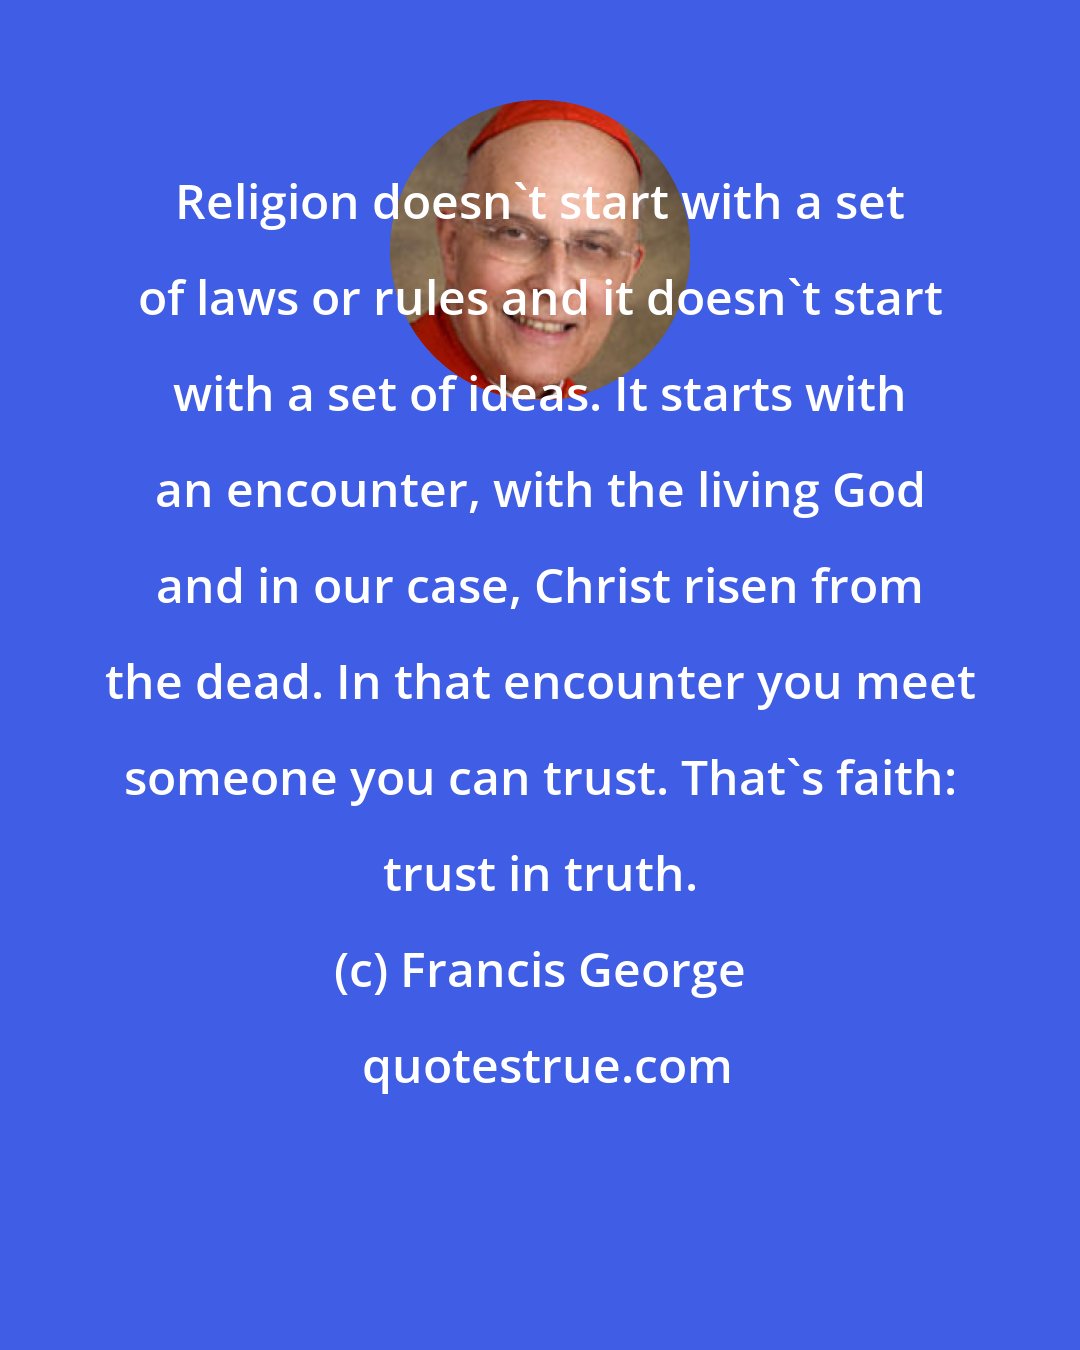 Francis George: Religion doesn't start with a set of laws or rules and it doesn't start with a set of ideas. It starts with an encounter, with the living God and in our case, Christ risen from the dead. In that encounter you meet someone you can trust. That's faith: trust in truth.